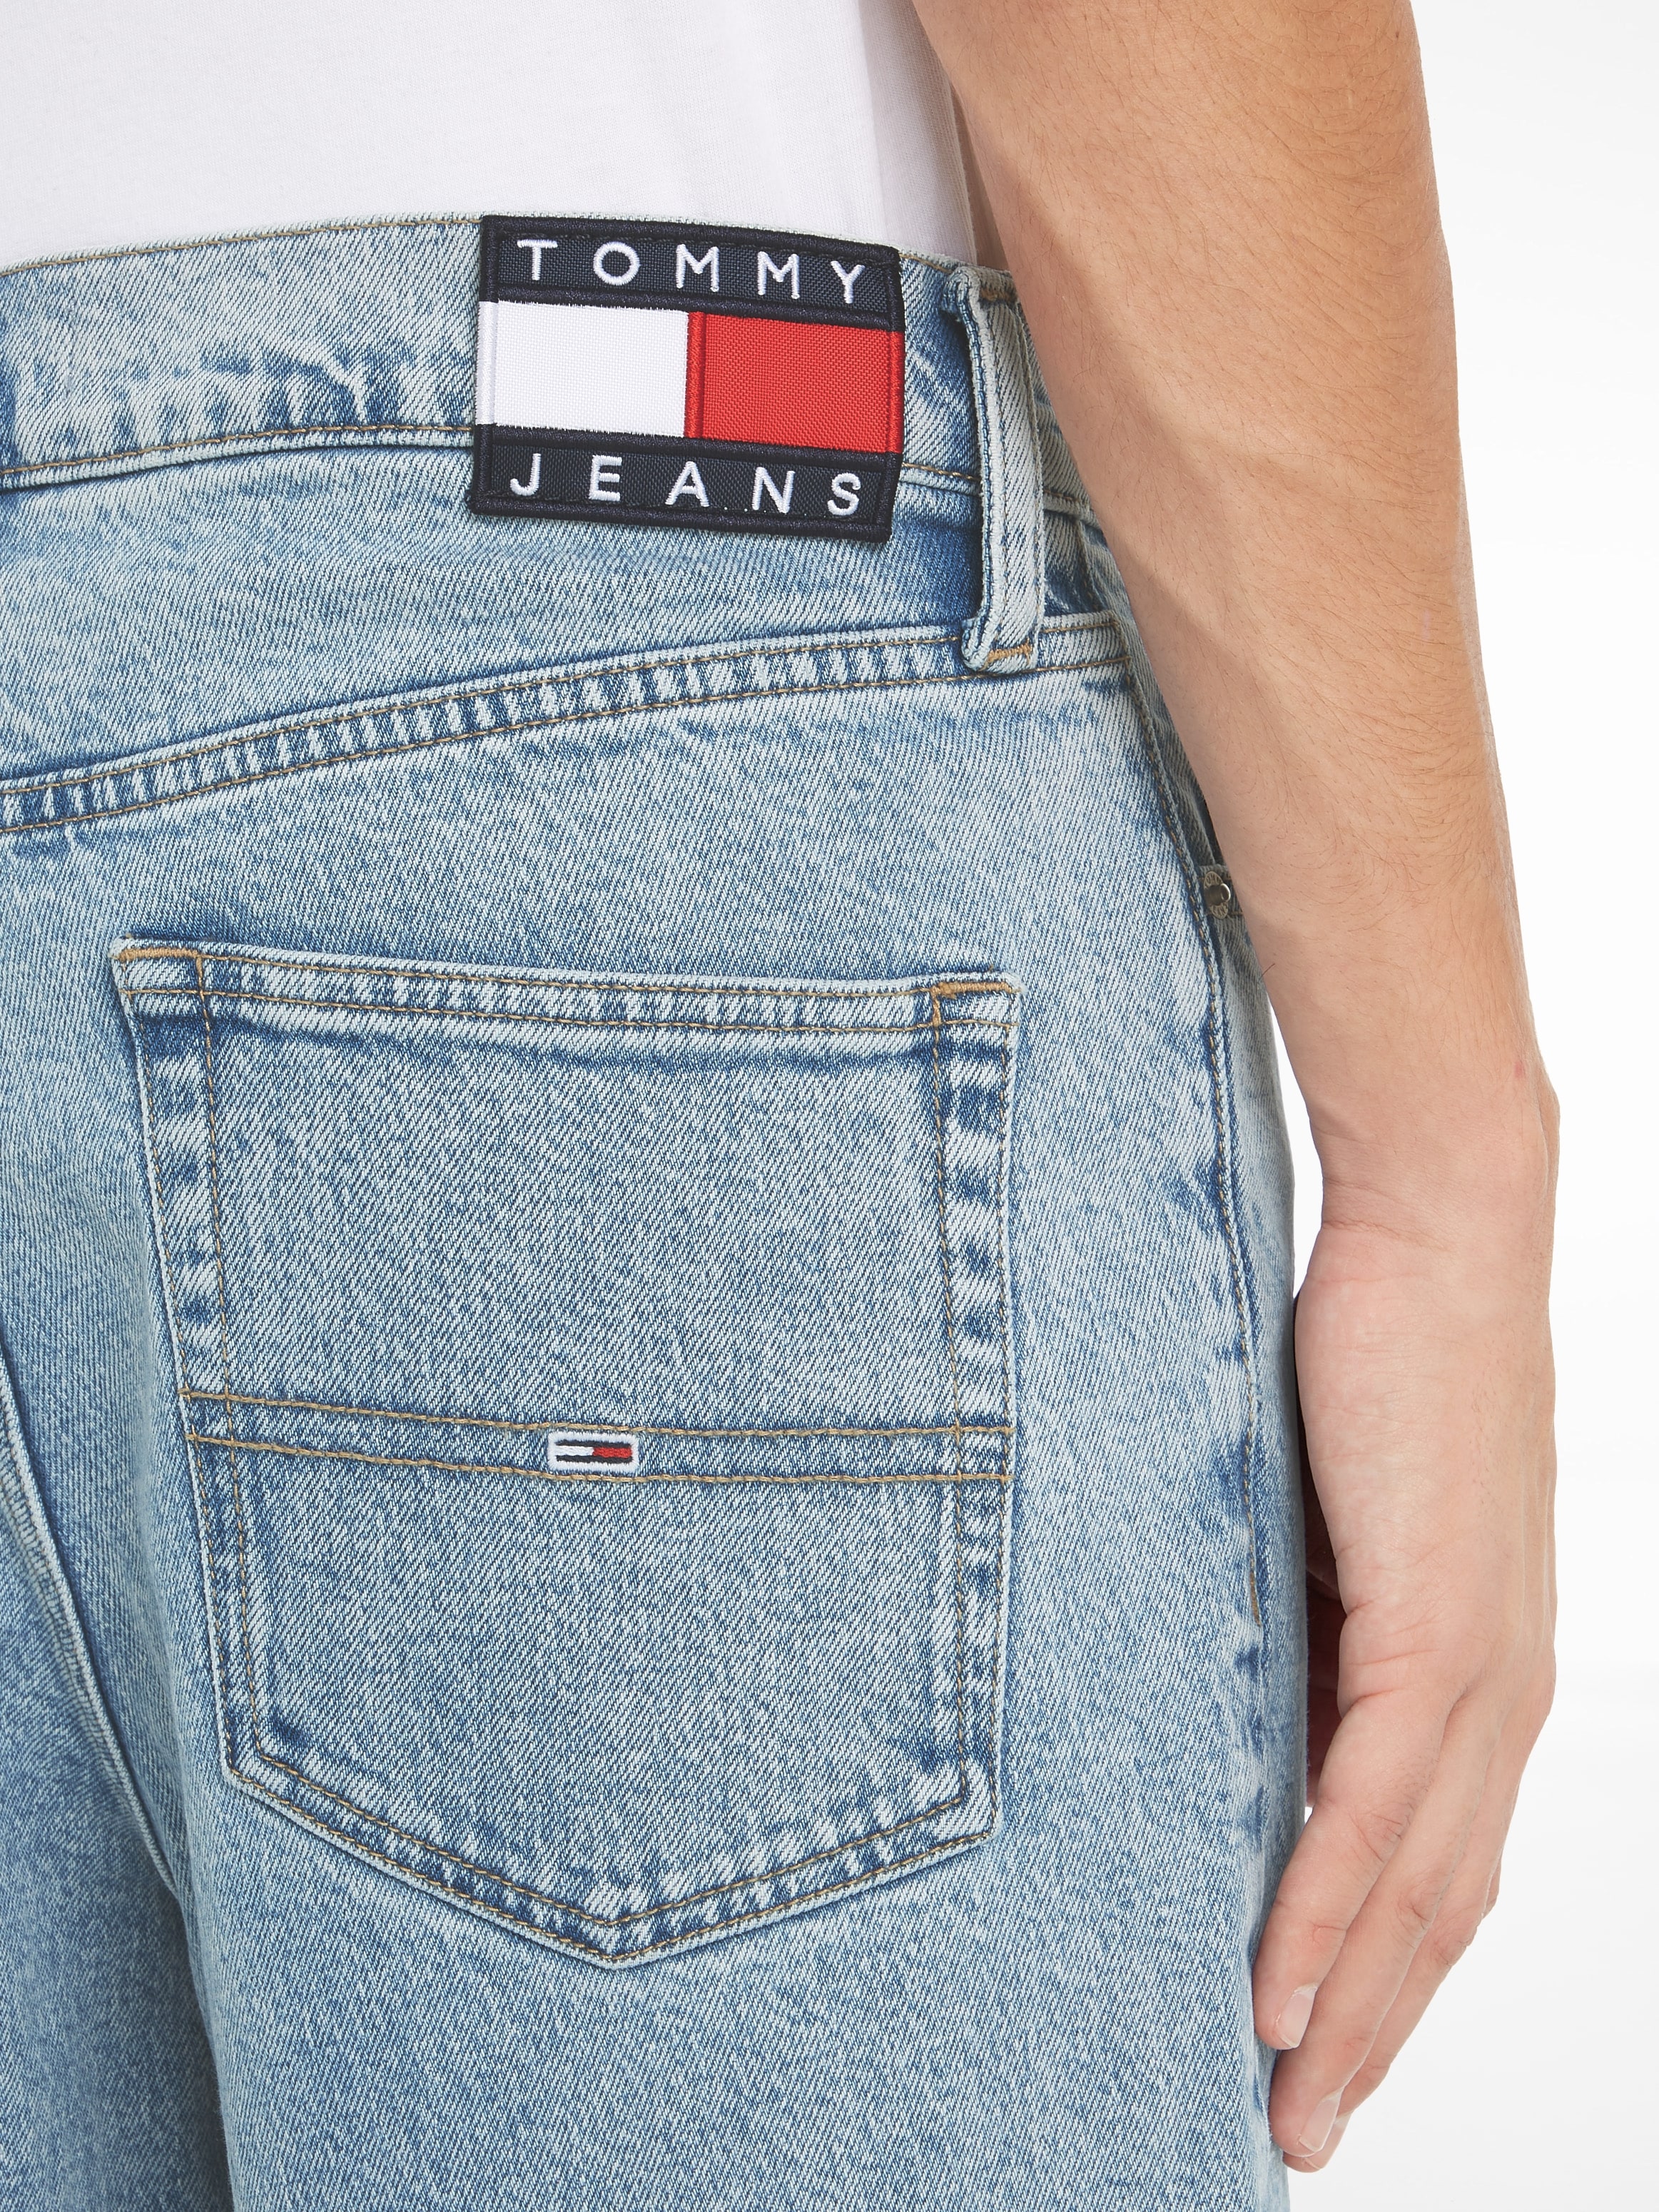 CG4114« Tommy kaufen TPRD »BAX Jeans 5-Pocket-Jeans OTTO LOOSE bei